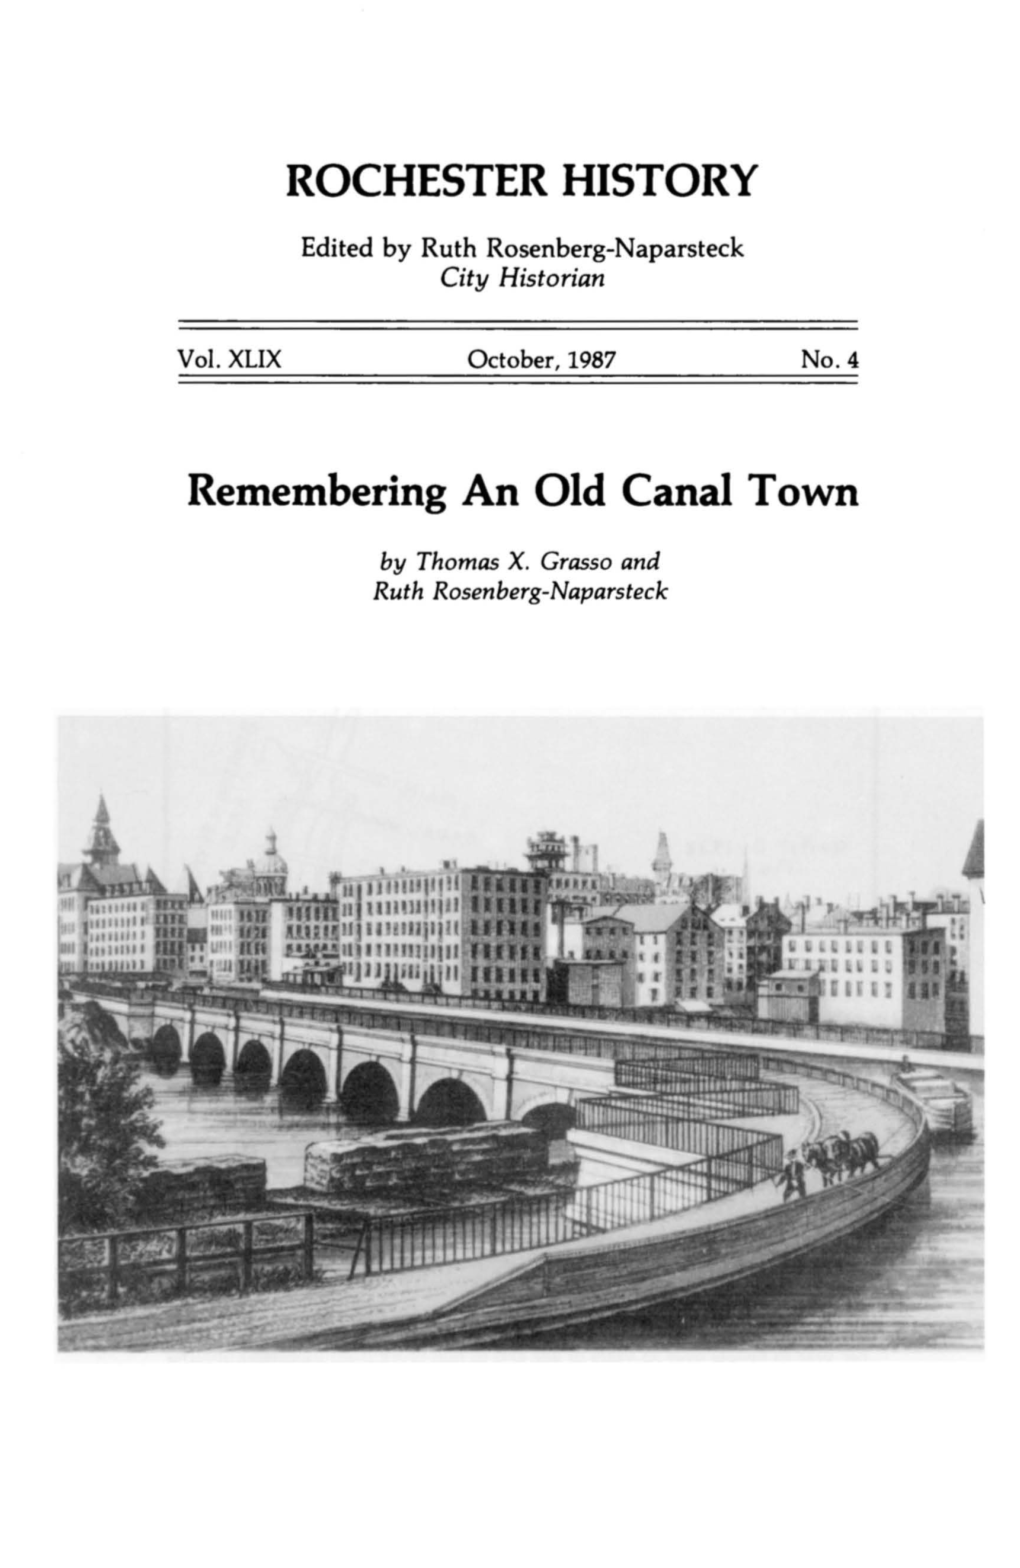 ROCHESTER HISTORY Remembering an Old Canal Town